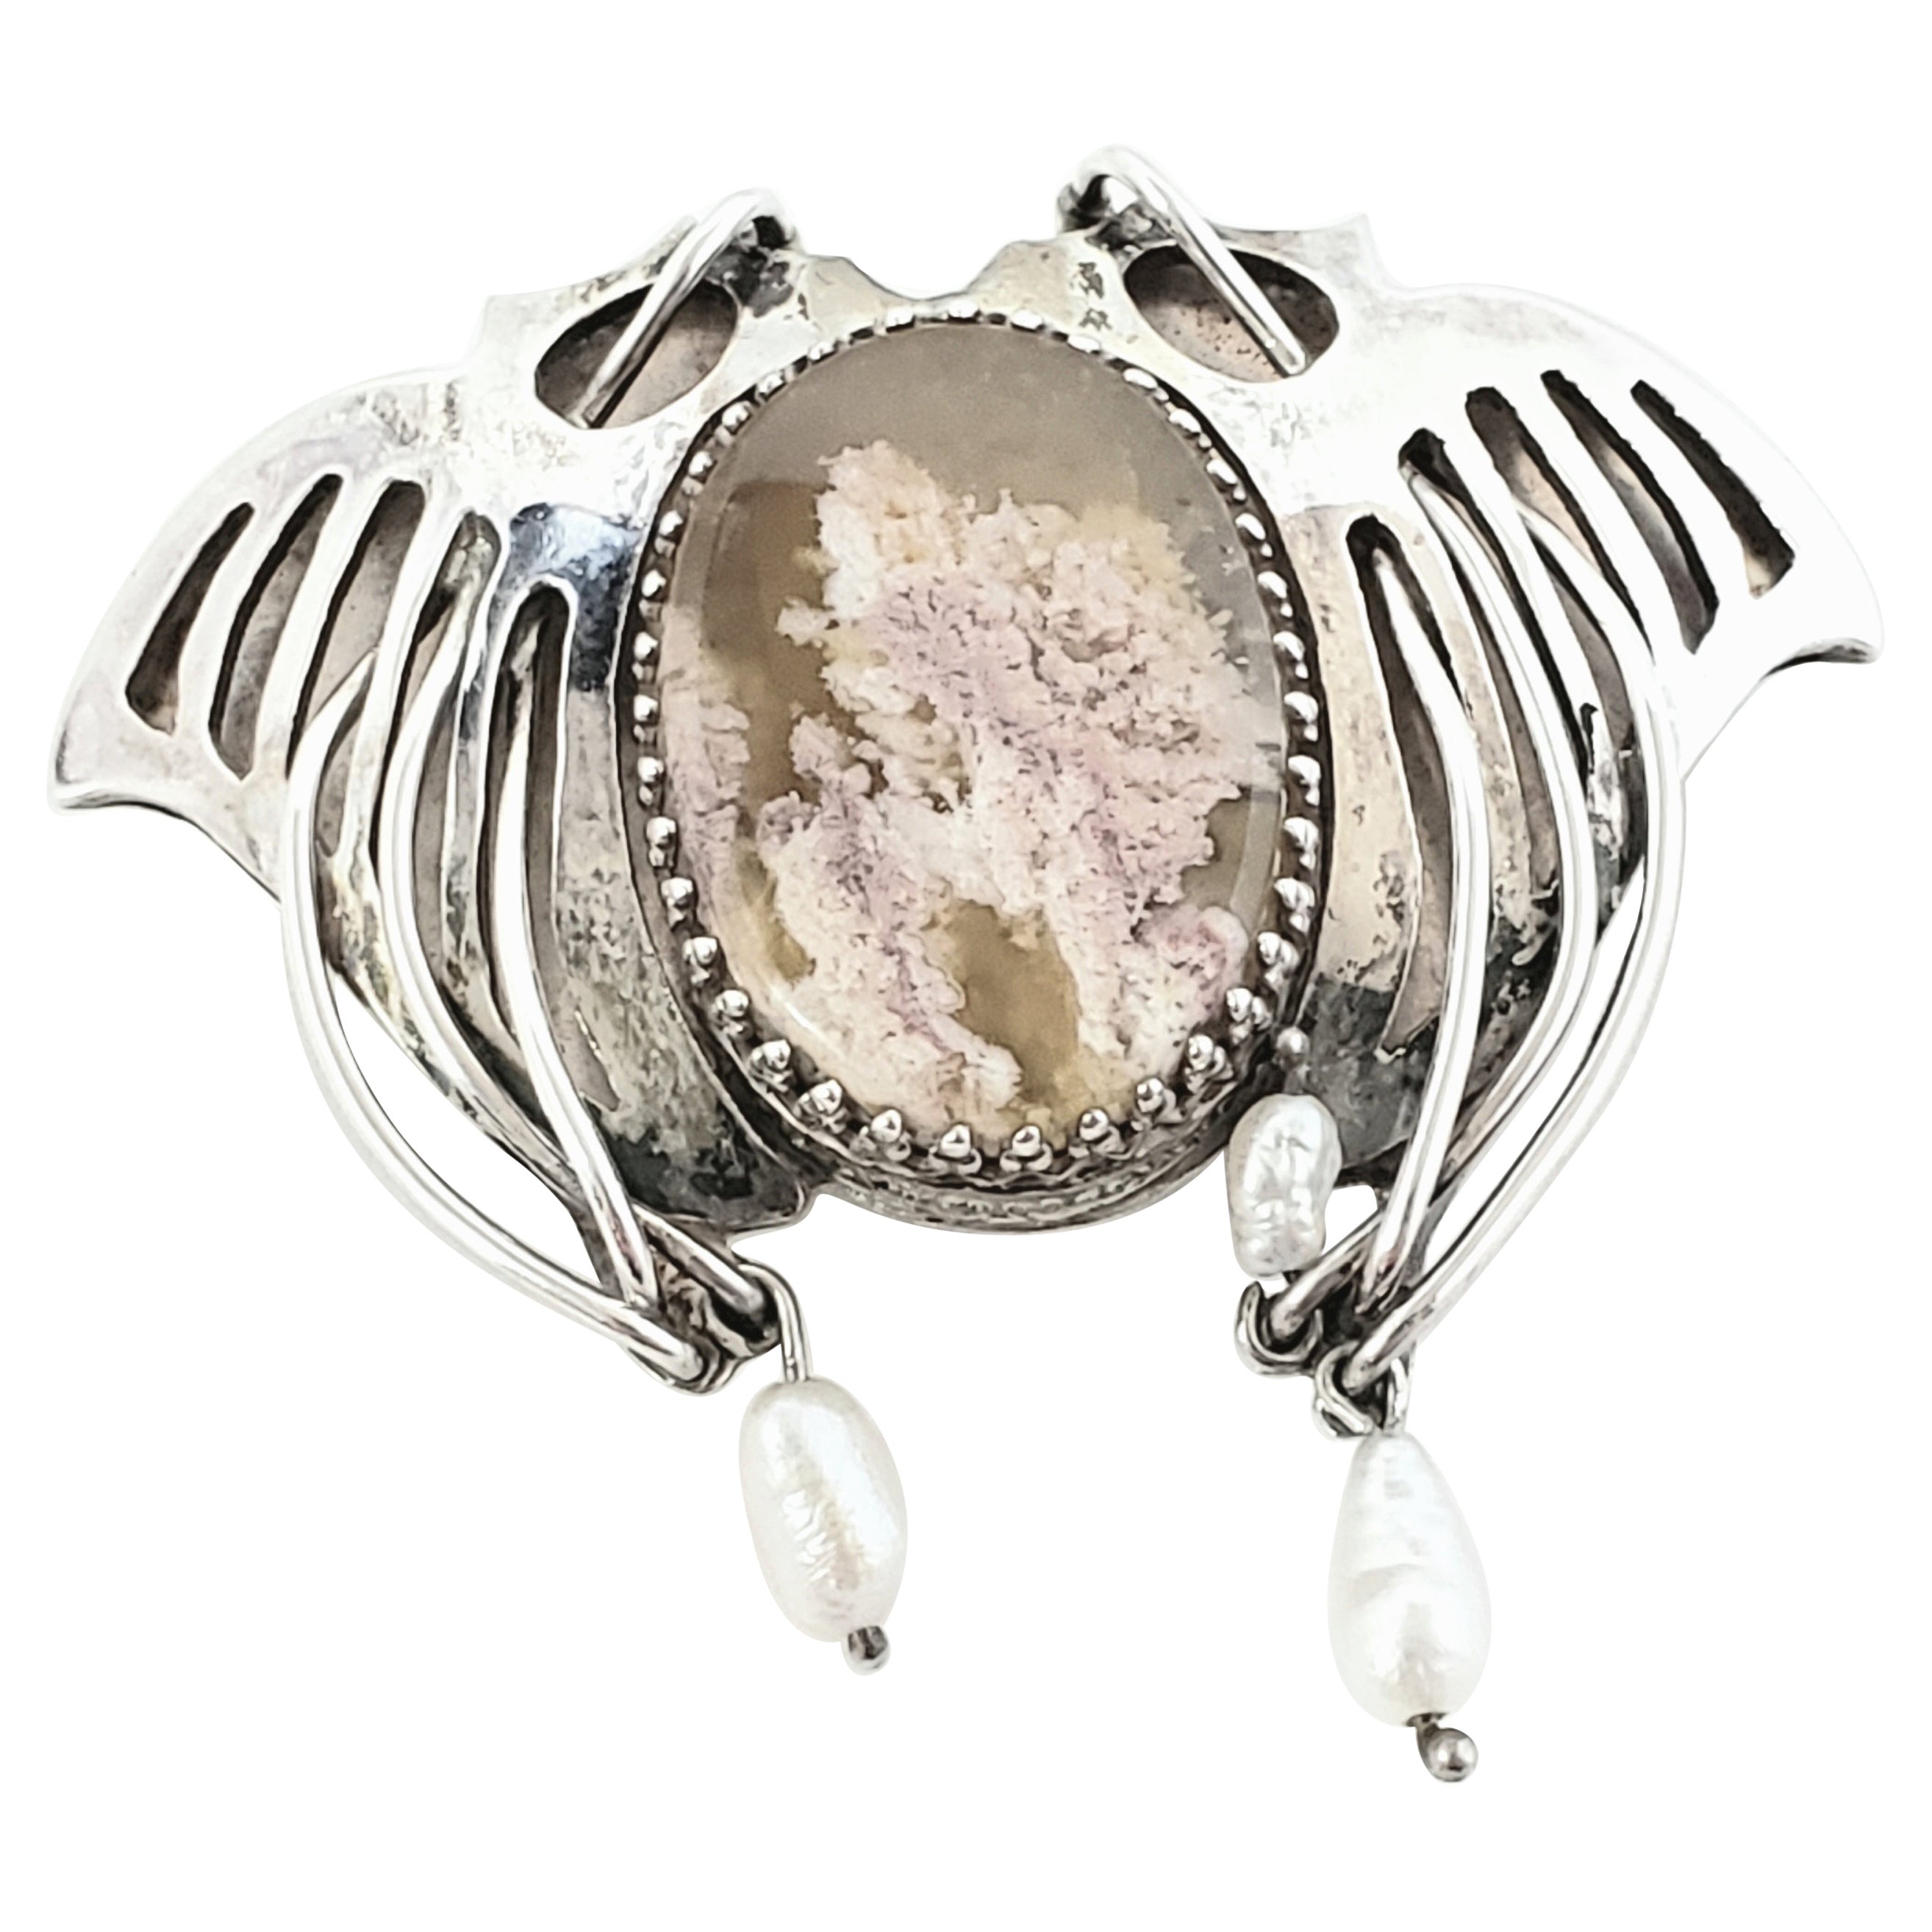 Handmade Artisan Sterling Silver Laguna Lace Agate and Pearl Wing Slide Pendant